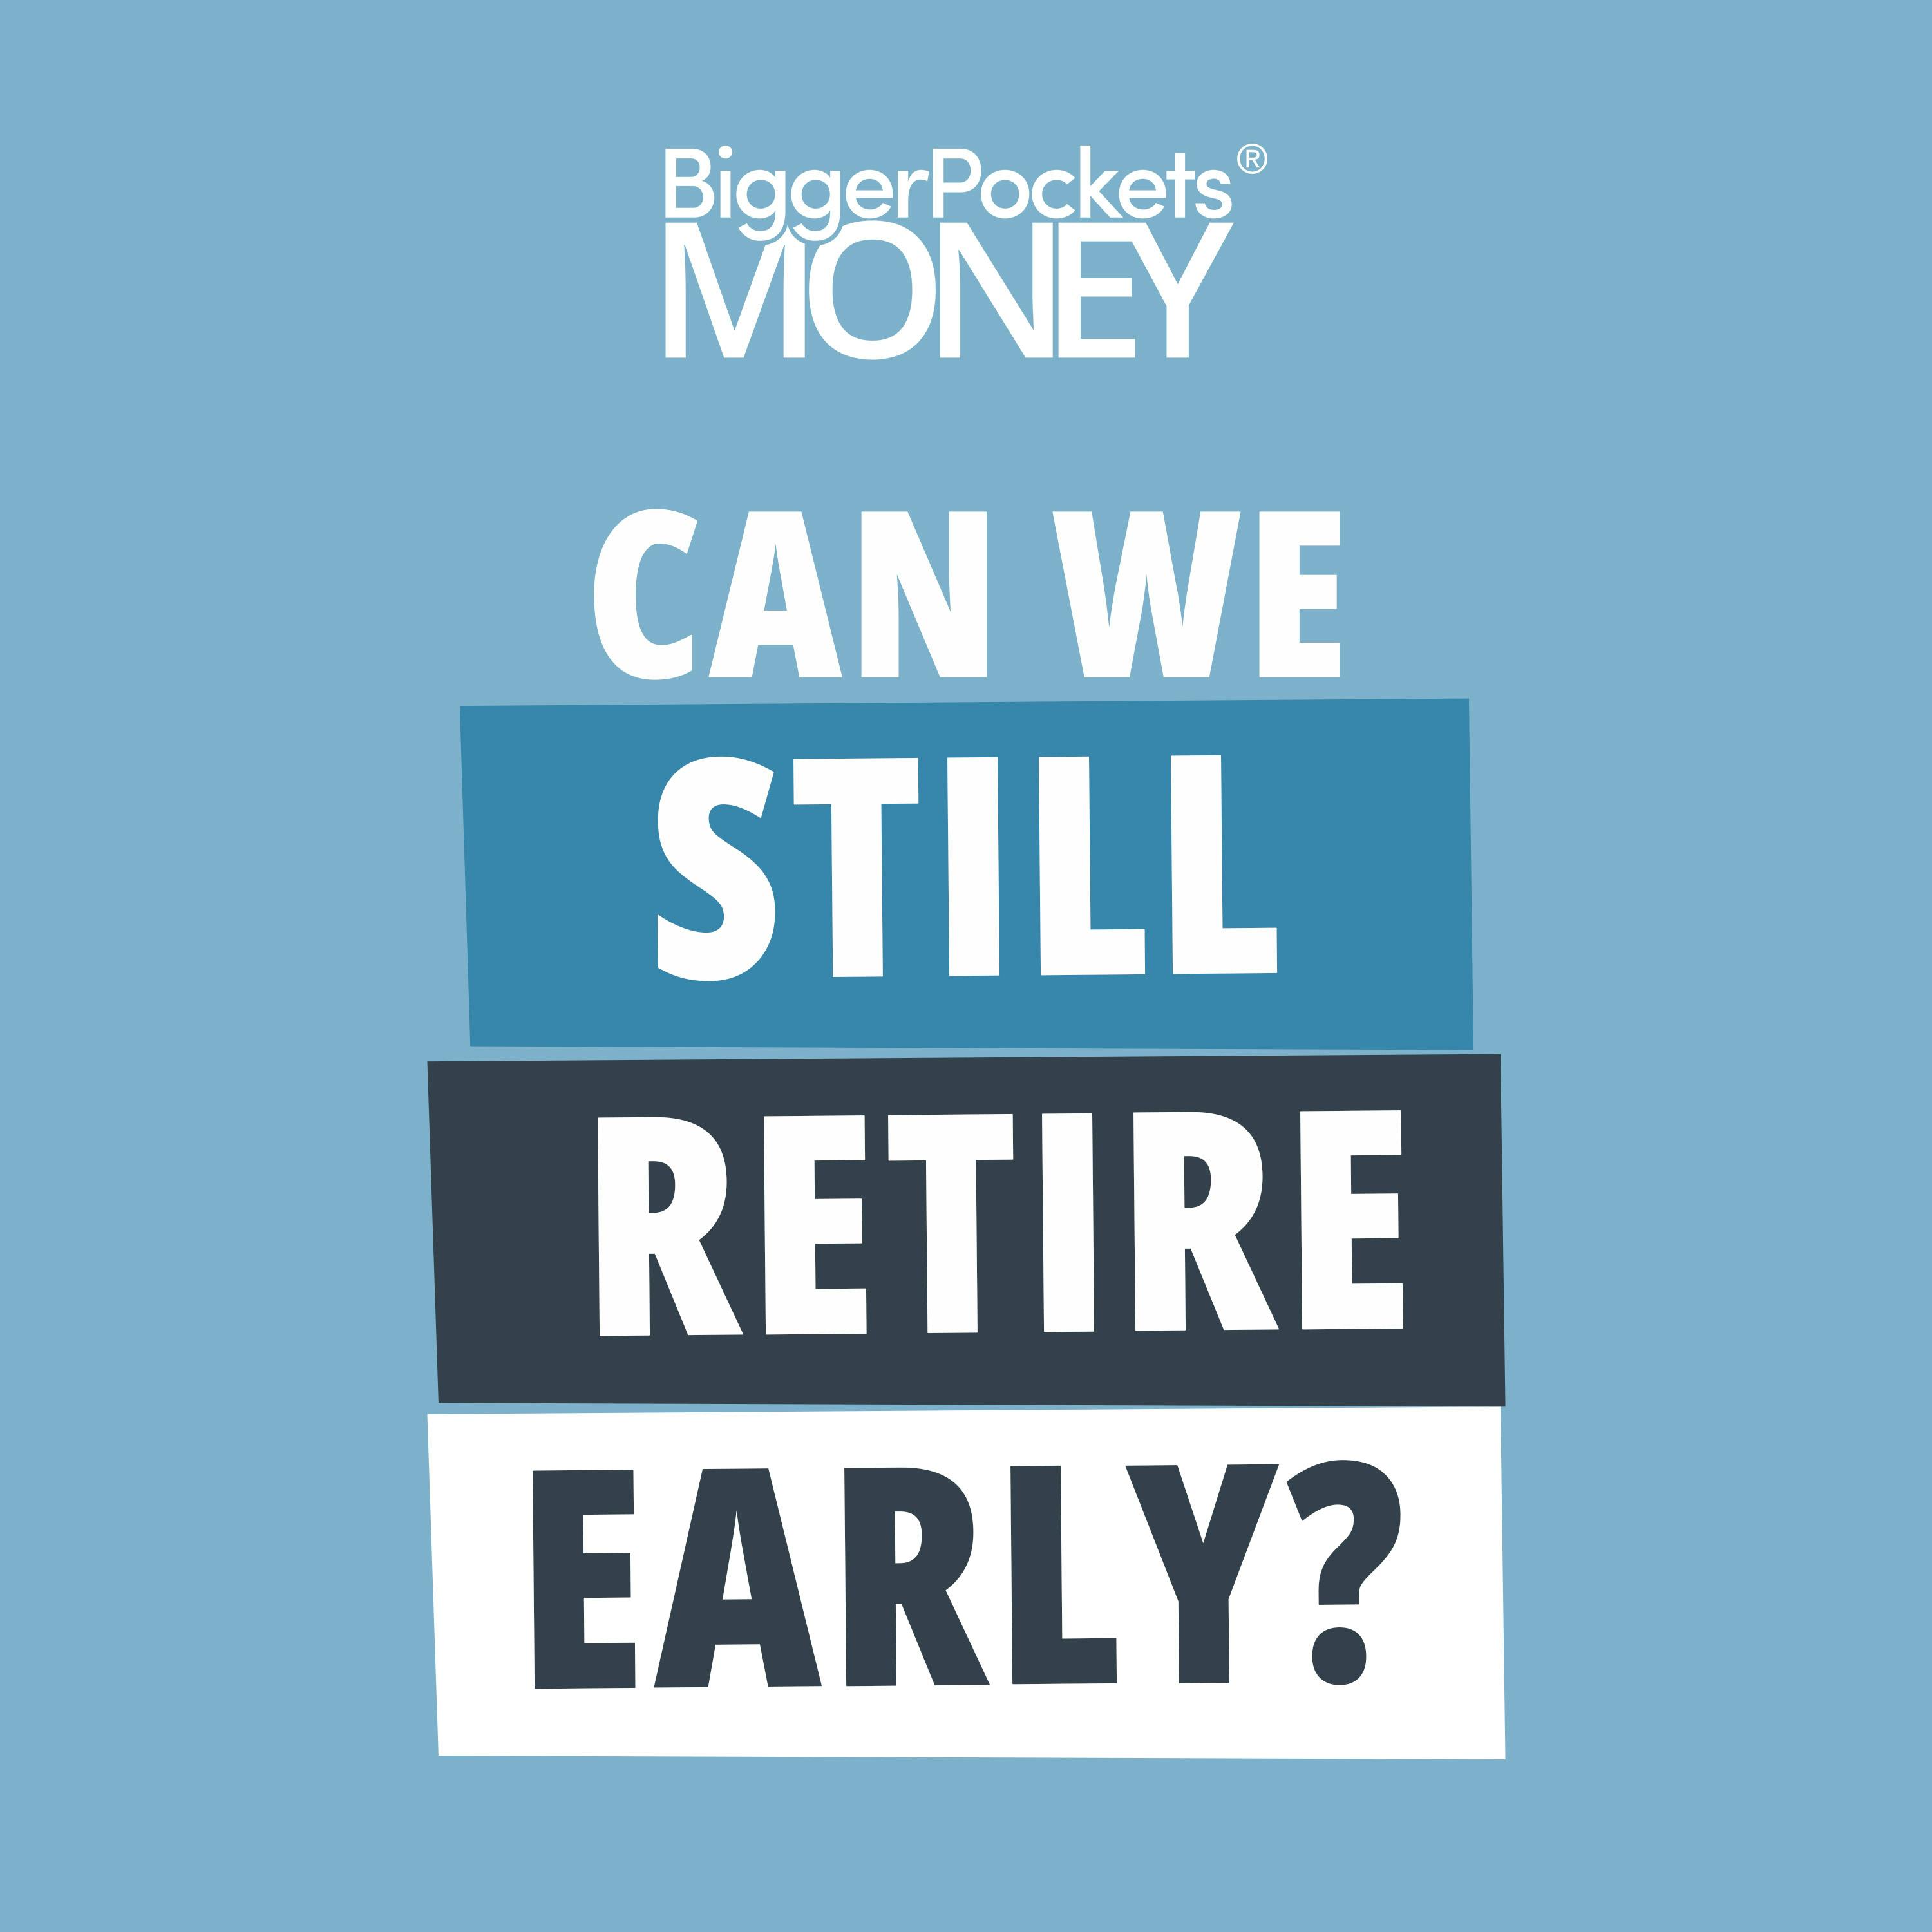 454: Finance Friday: We Spend $12K a Month...Can We Still Retire in 10 Years?